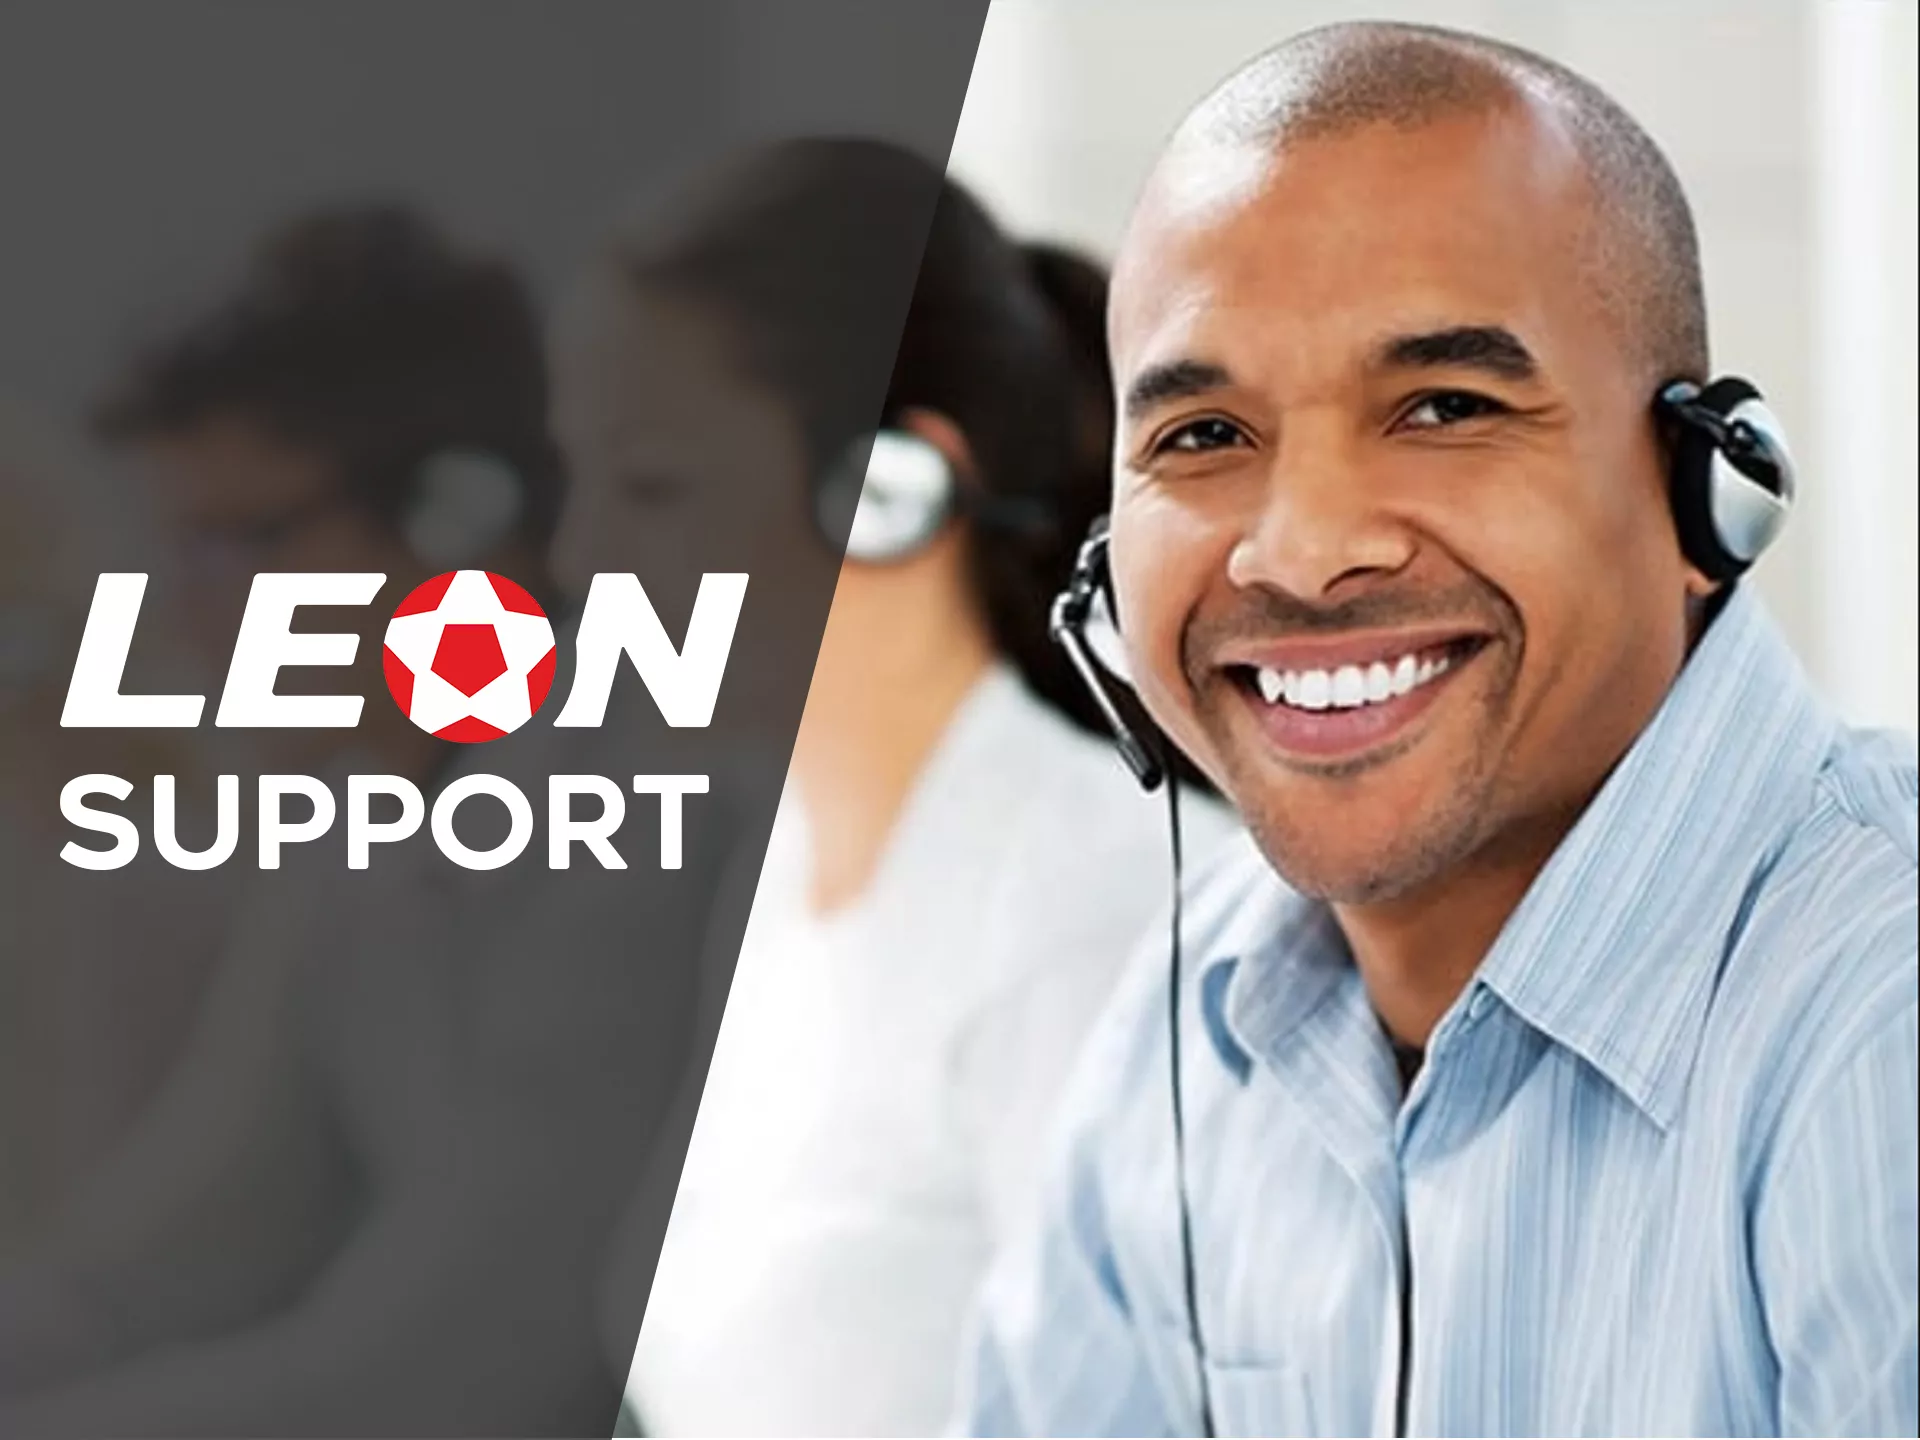 You can reach the Leonbet support team via your smartphone.